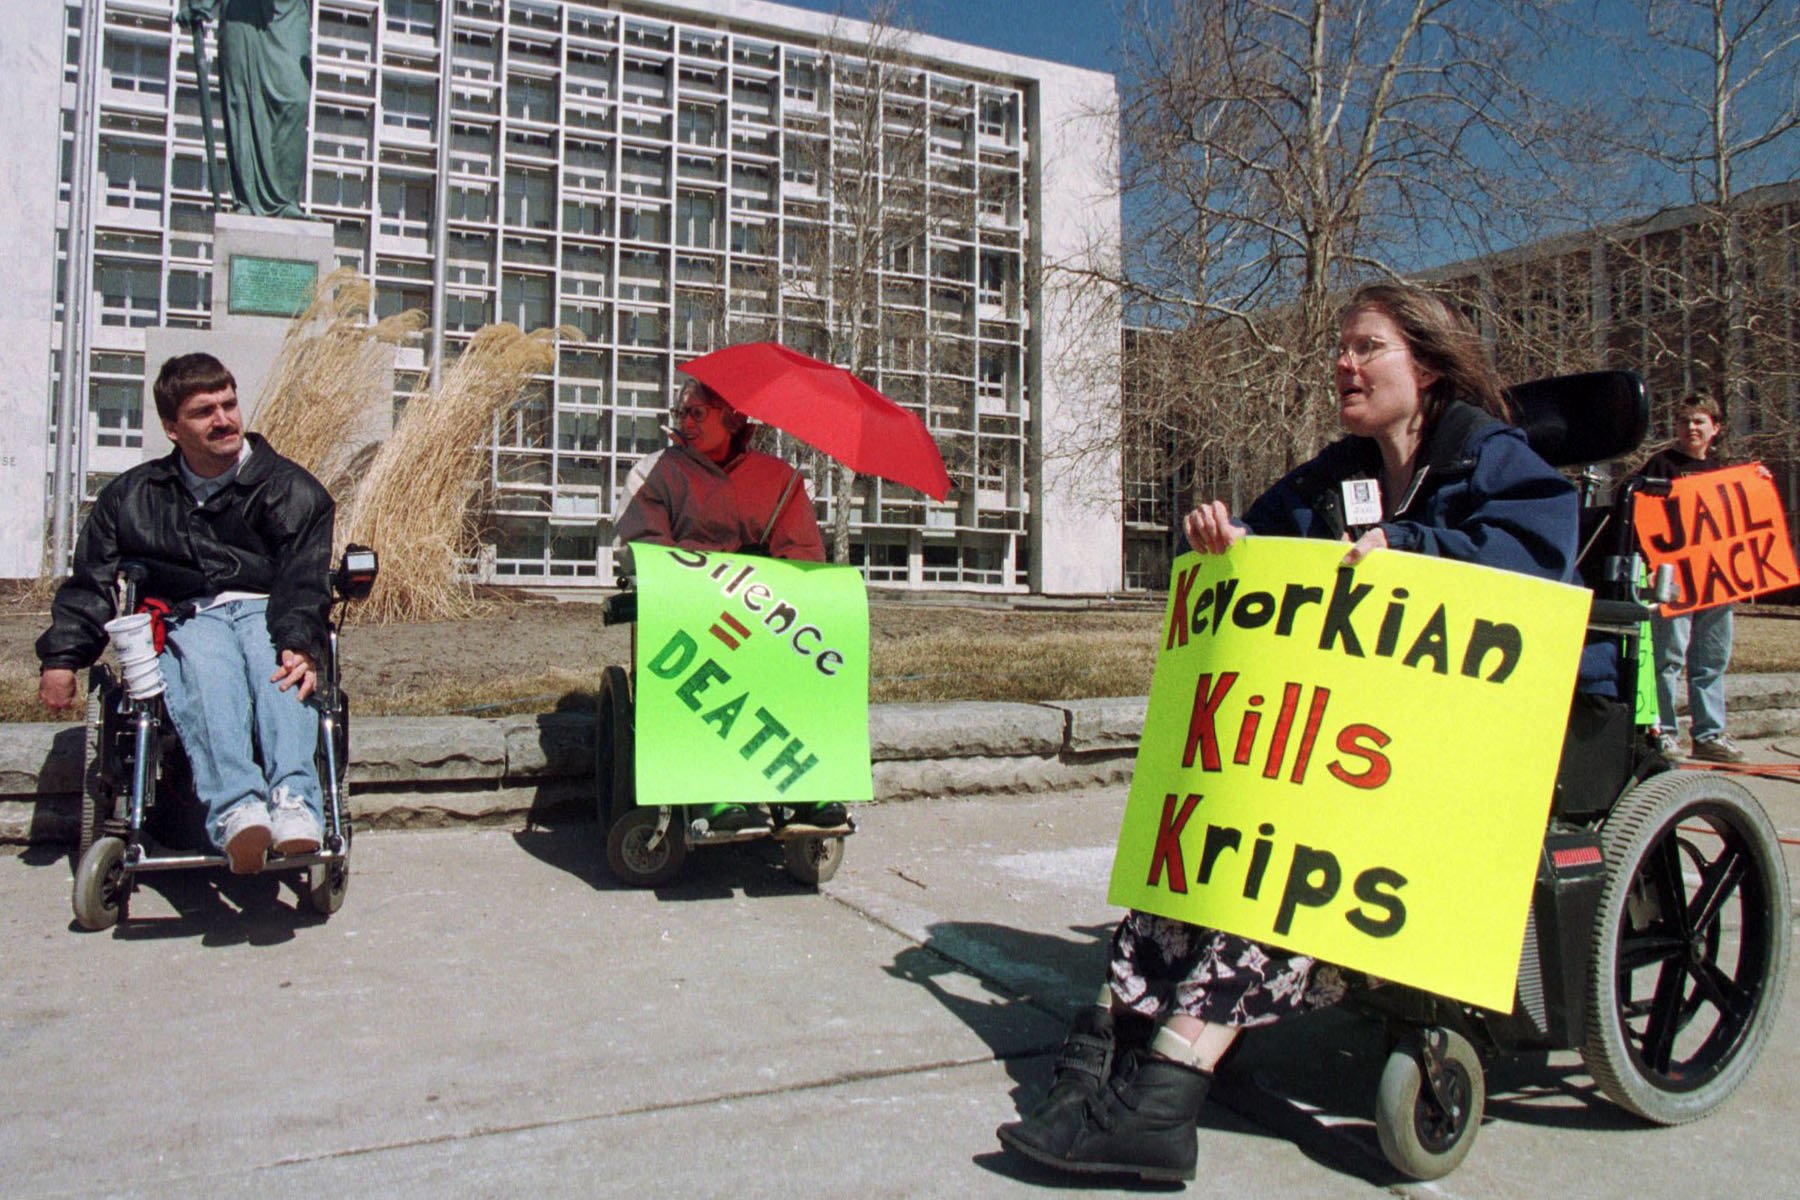 Diane Coleman and other demonstrators in wheelchairs protest outside of the Oakland County Courthouse. Coleman holds a sign that reads "Kevorkian Kills Krips."